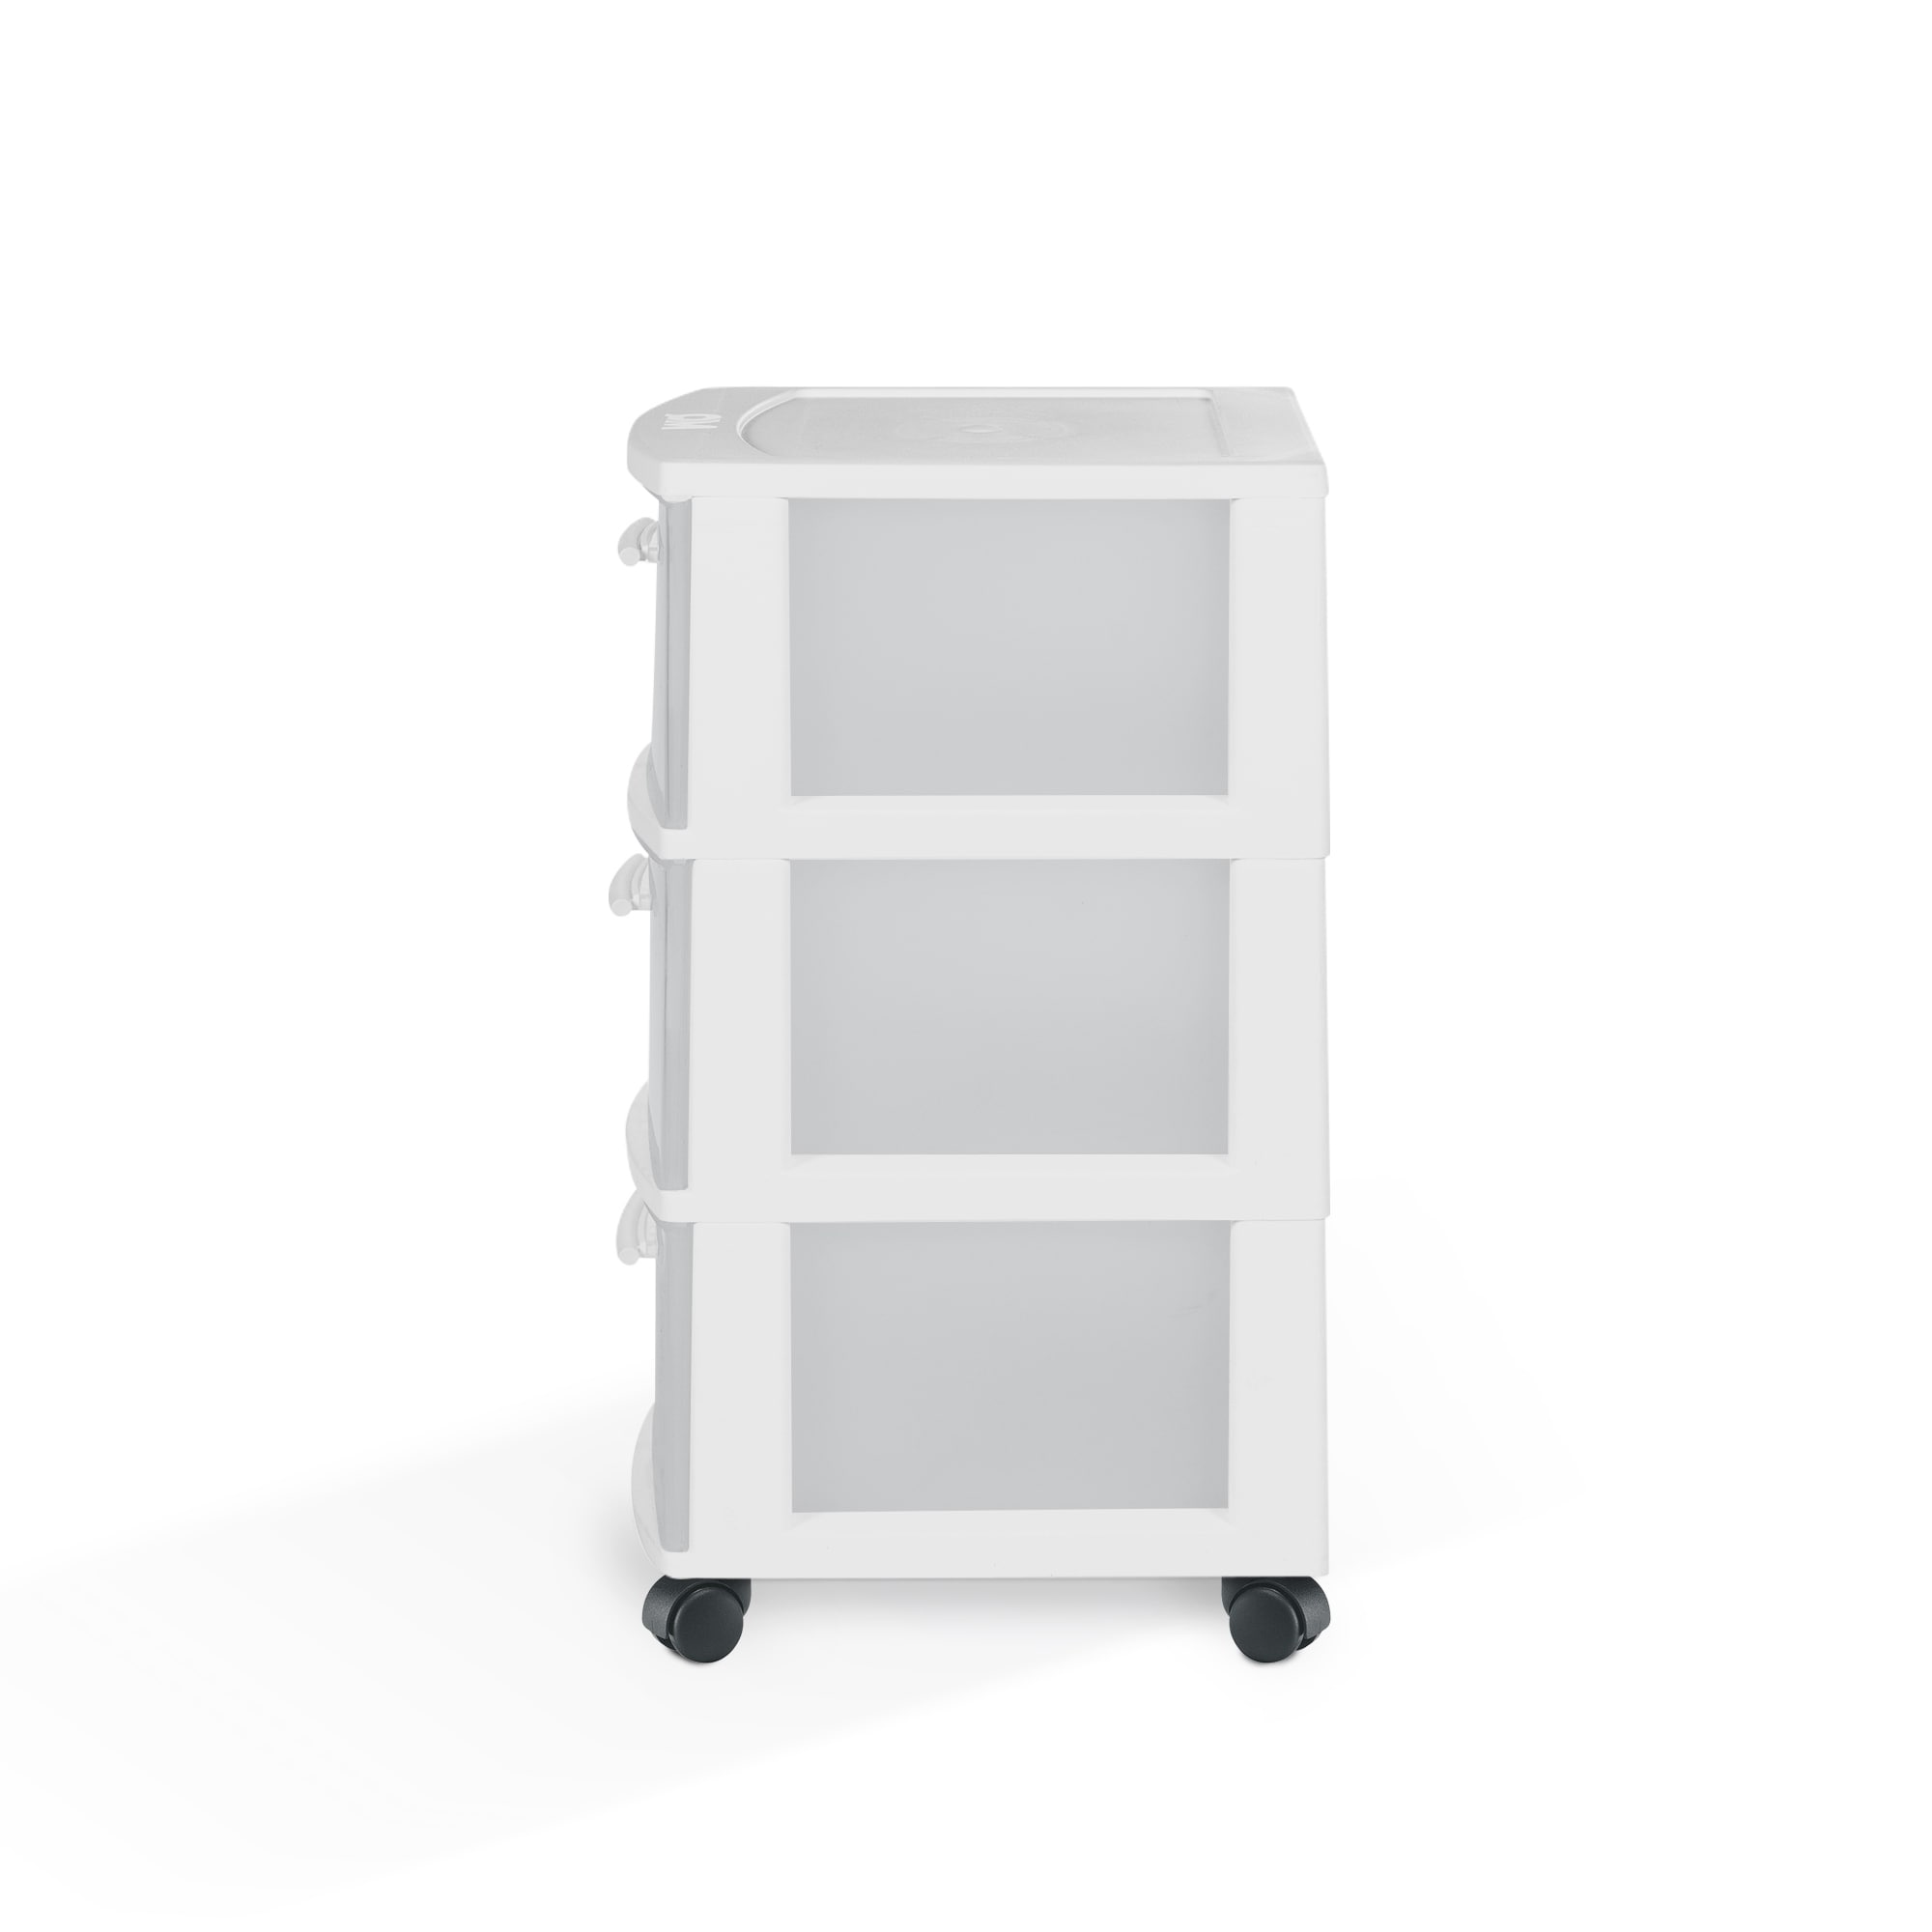 https://ak1.ostkcdn.com/images/products/is/images/direct/049a23b6343d59933a1abed6abc0326c698f1470/MQ-3-Drawer-Plastic-Rolling-Storage-Cart-with-Casters-%282-Pack%29.jpg